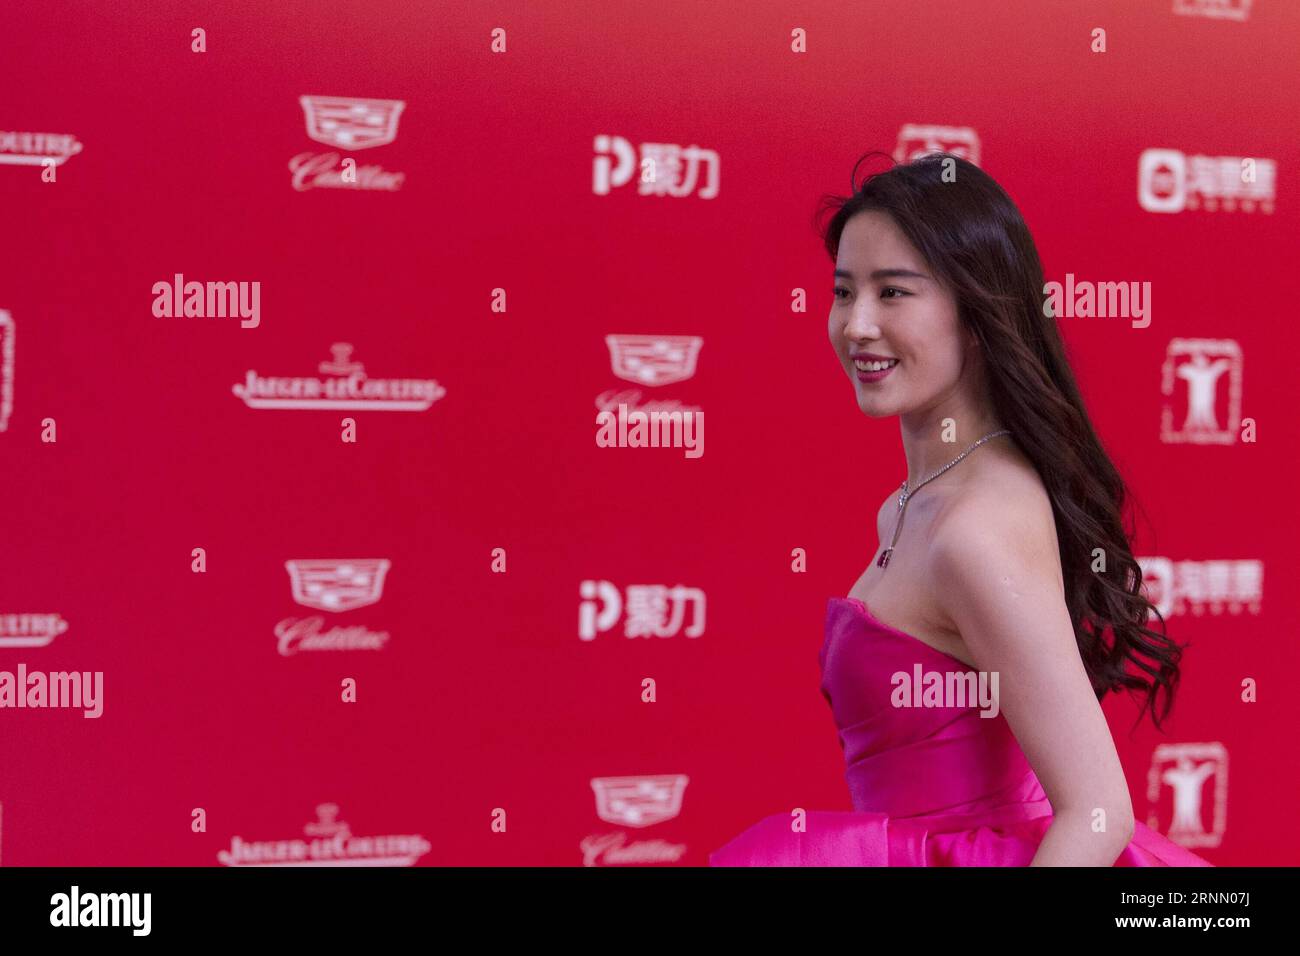 (170618) -- SHANGHAI, June 18, 2017 -- Actress Liu Yifei attends the 20th Shanghai International Film Festival in Shanghai, east China, June 17, 2017. The 20th Shanghai International Film Festival kicked off here Saturday. ) (yxb) CHINA-SHANGHAI-FILM FESTIVAL(CN) DuxXiaoyi PUBLICATIONxNOTxINxCHN   Shanghai June 18 2017 actress Liu Yifei Attends The 20th Shanghai International Film Festival in Shanghai East China June 17 2017 The 20th Shanghai International Film Festival kicked off Here Saturday yxb China Shanghai Film Festival CN  PUBLICATIONxNOTxINxCHN Stock Photo